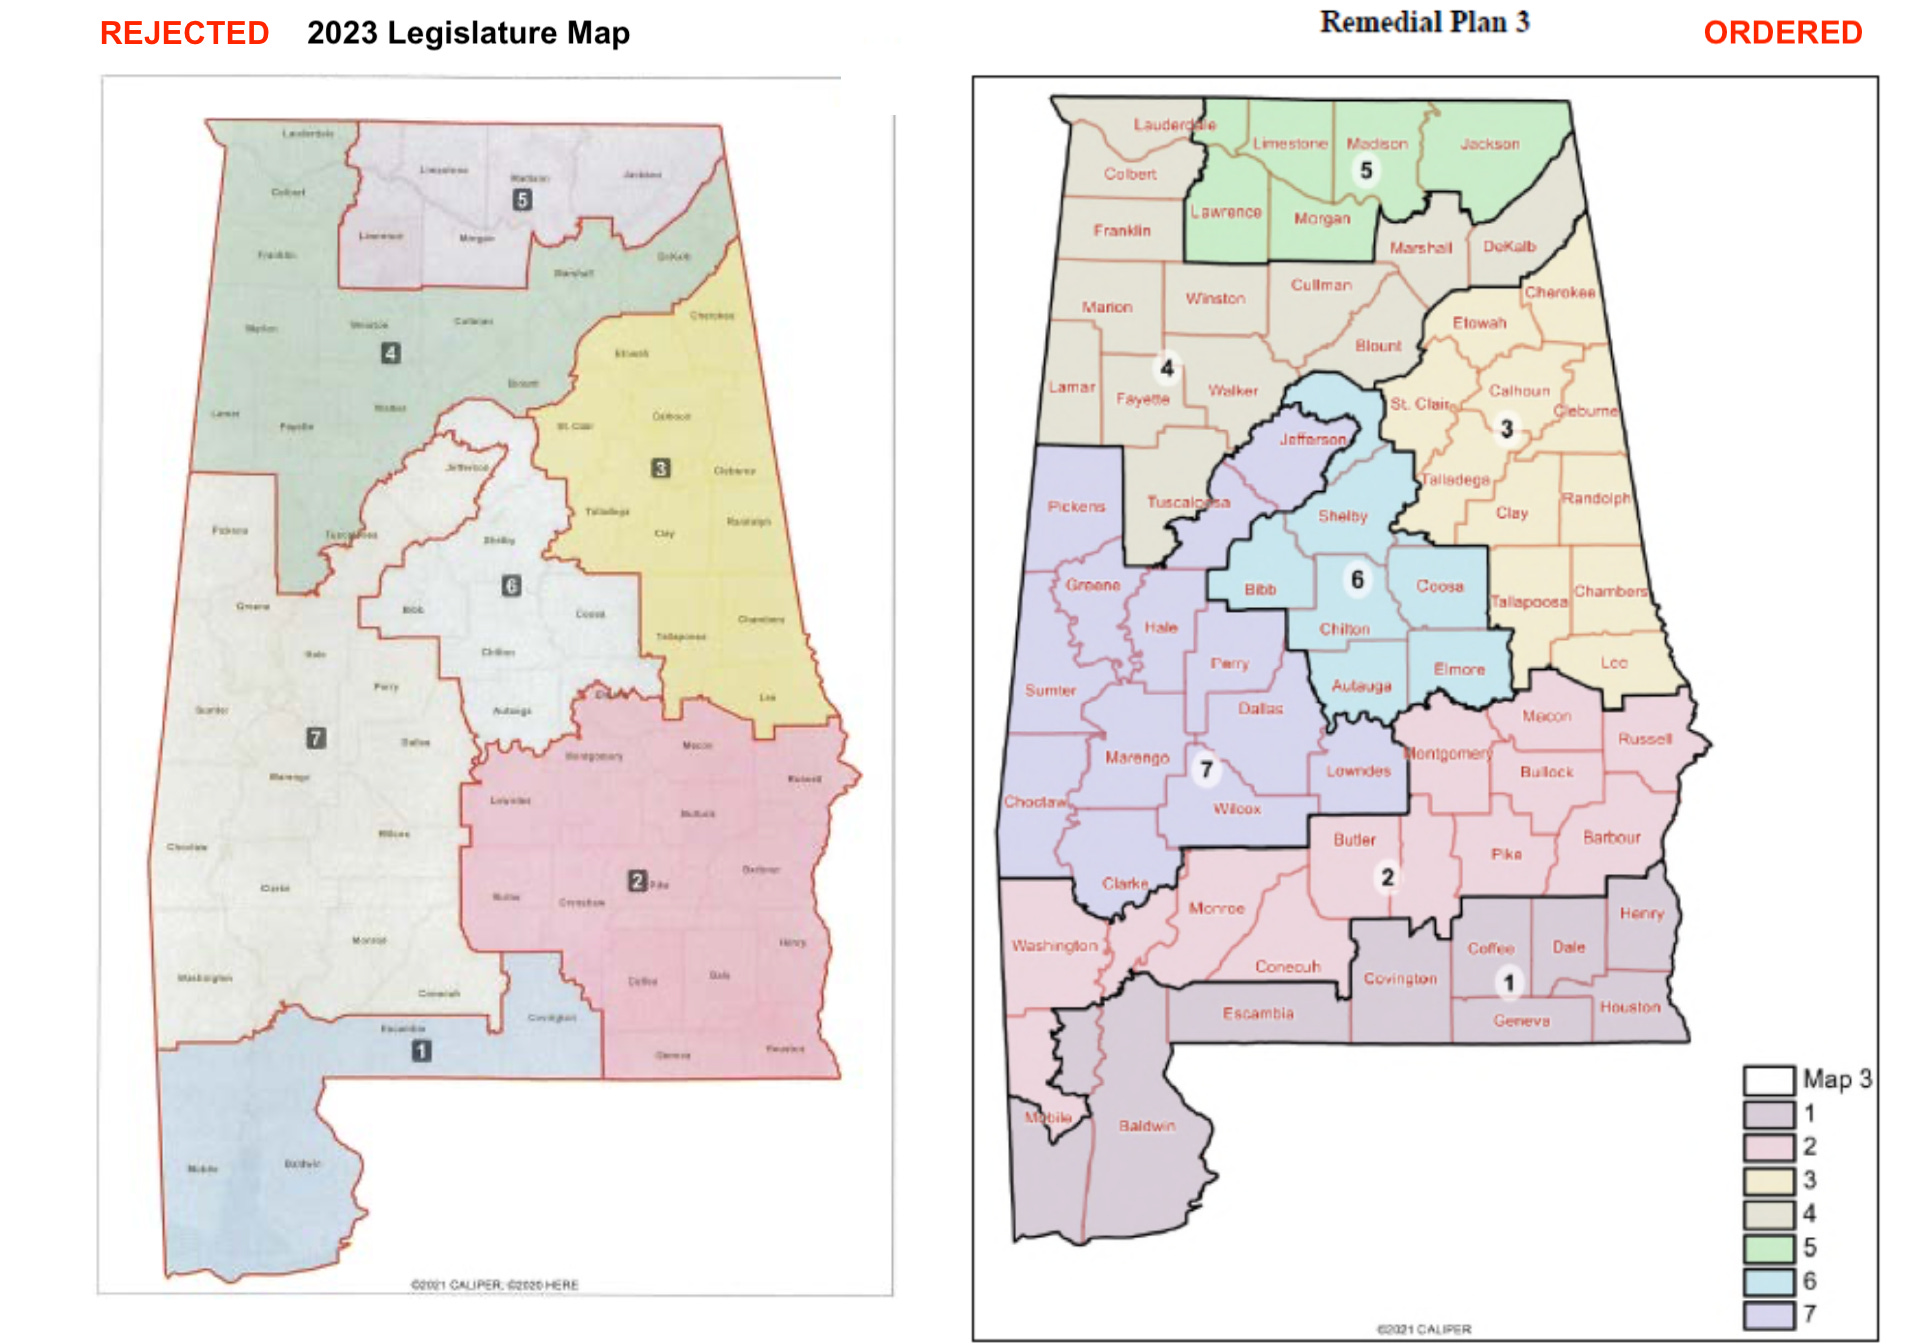 Alabama gets a new, court-ordered congressional map